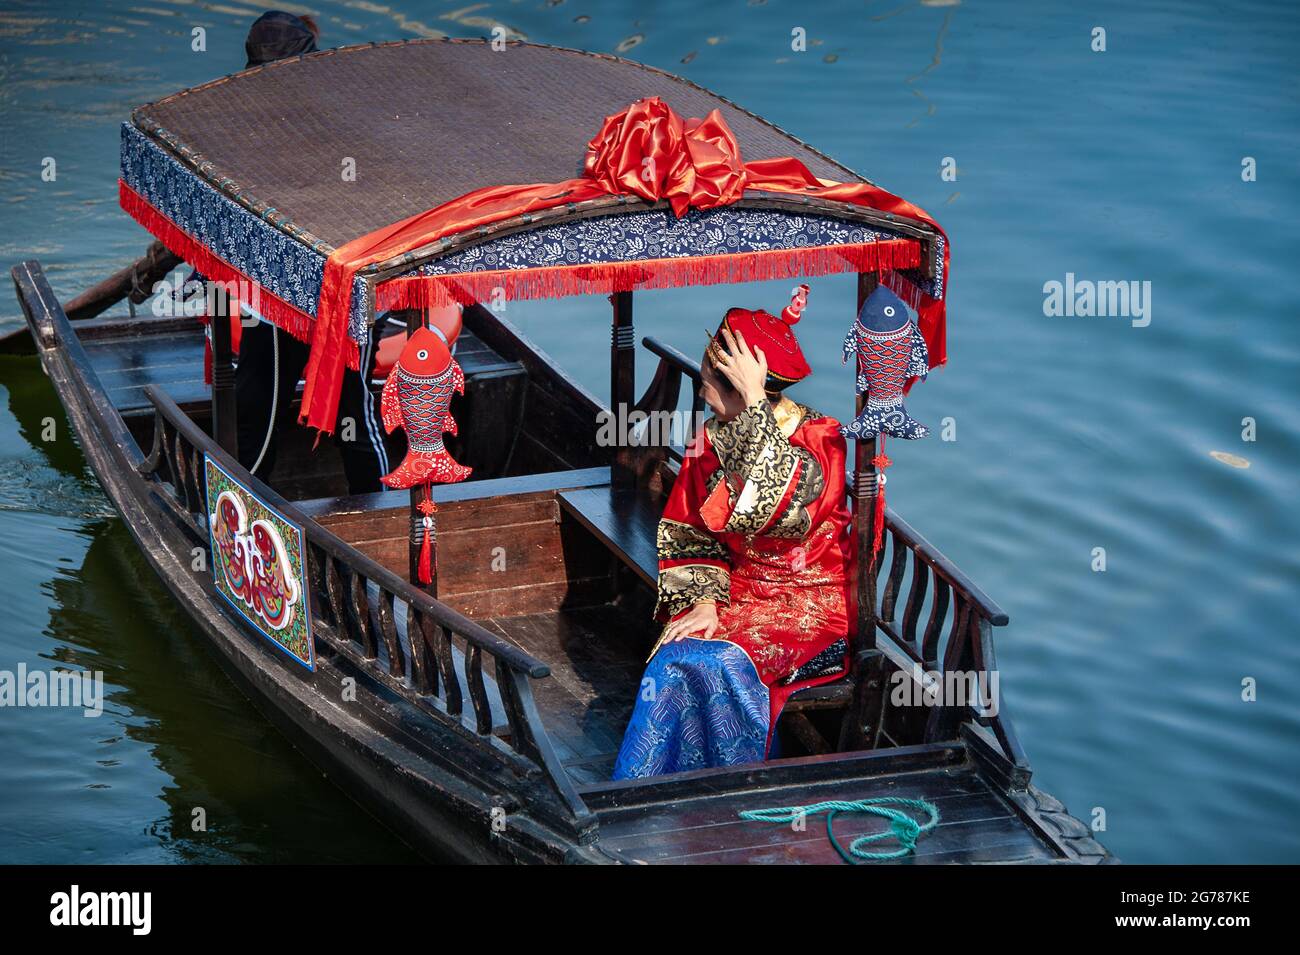 Wuxi, China - October 2019: Woman dressed in traditional Chinese wedding costume on a decorated river barge, against blue background. Stock Photo